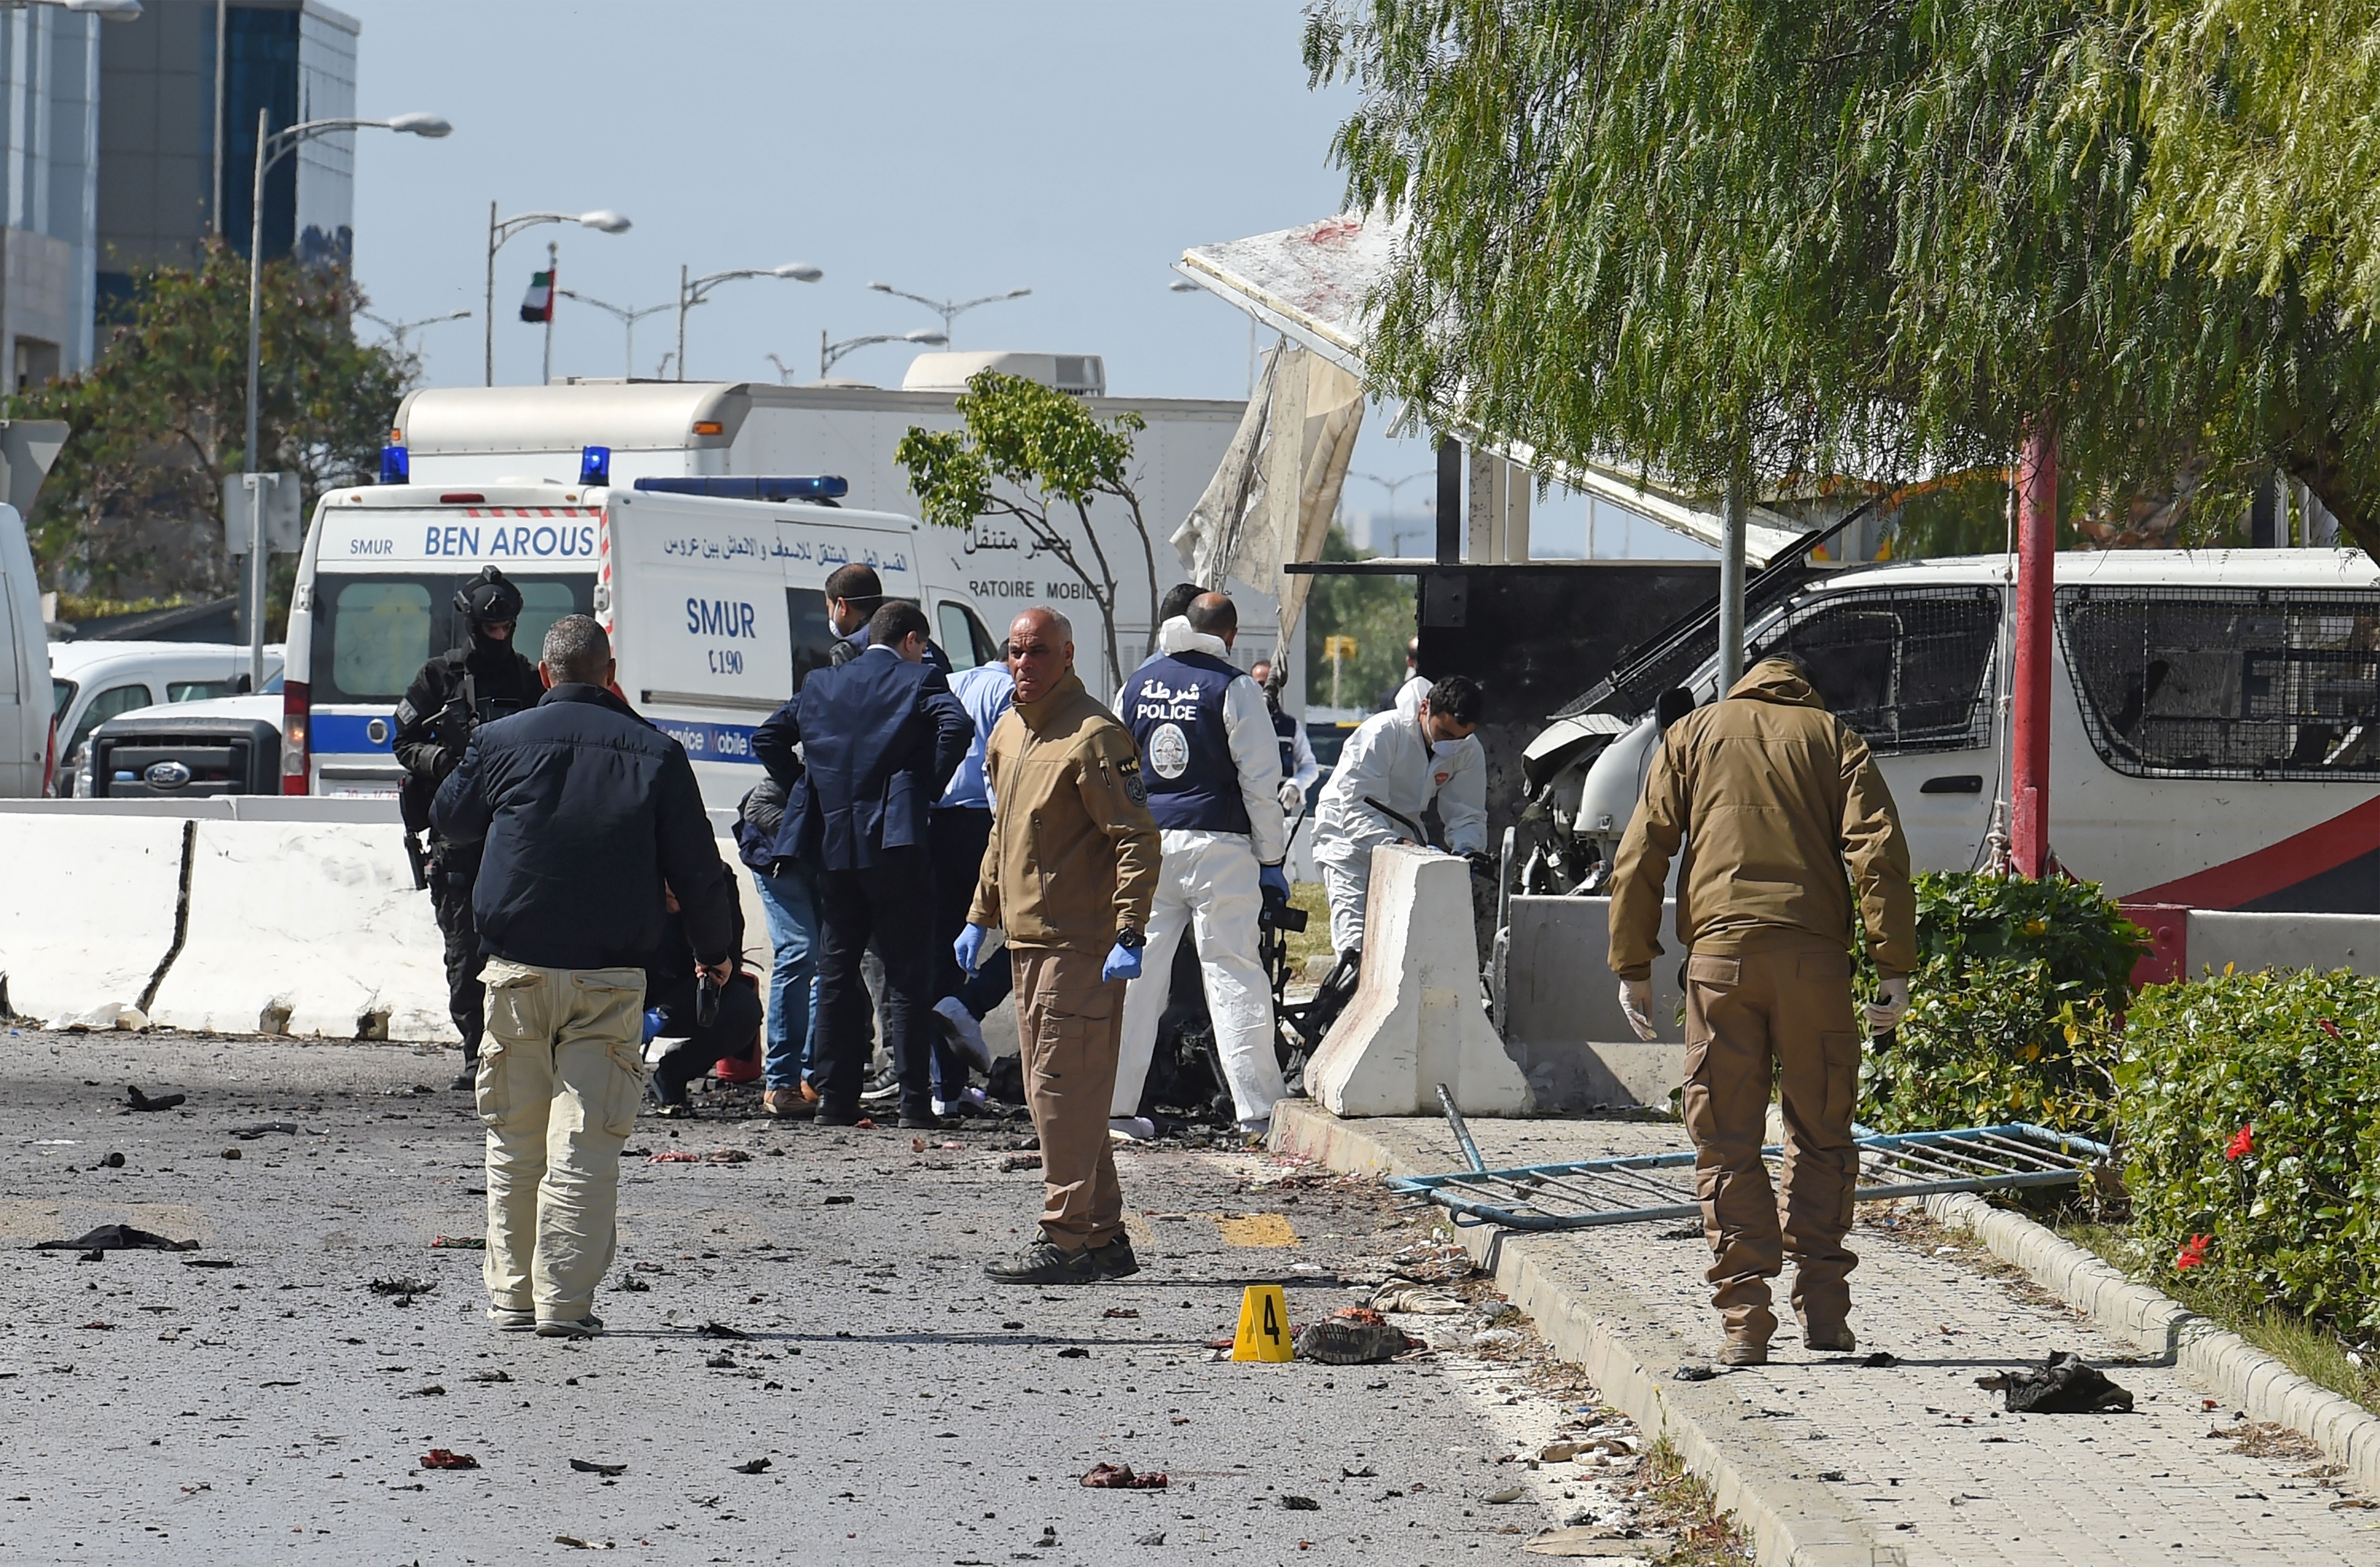 Police and forensic experts inspect the scene of an explosion near the US embassy in the Tunisian capital Tunis (Photo by FETHI BELAID/AFP via Getty Images)